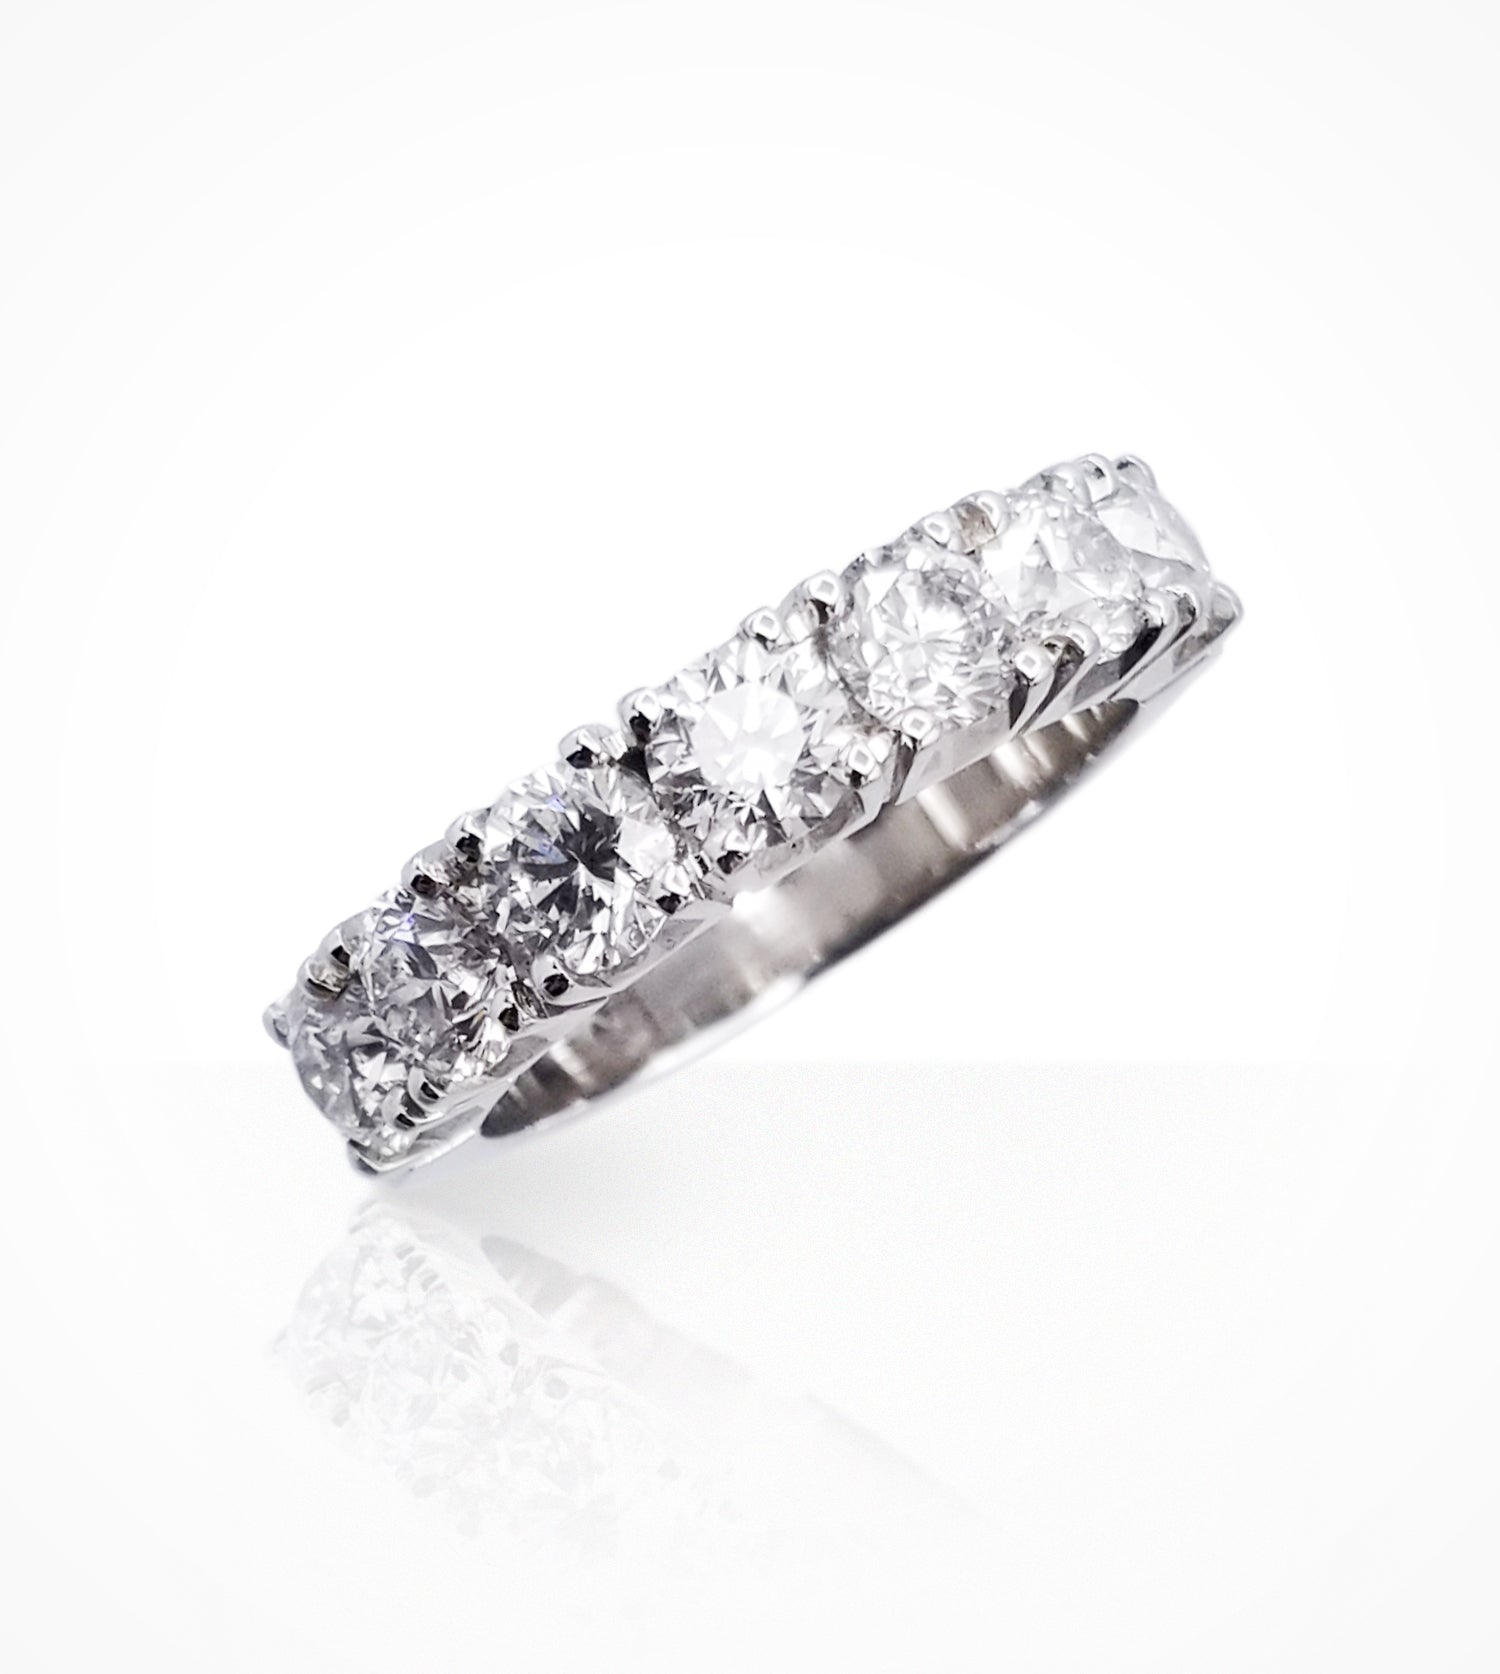 WB00020 18K white gold 7 diamond band=2.14cts gh, si1. $8700.00 ready-to-wear jewellery at Secrett.ca in Toronto Downtown Yorkville gh si1 $8700.00 